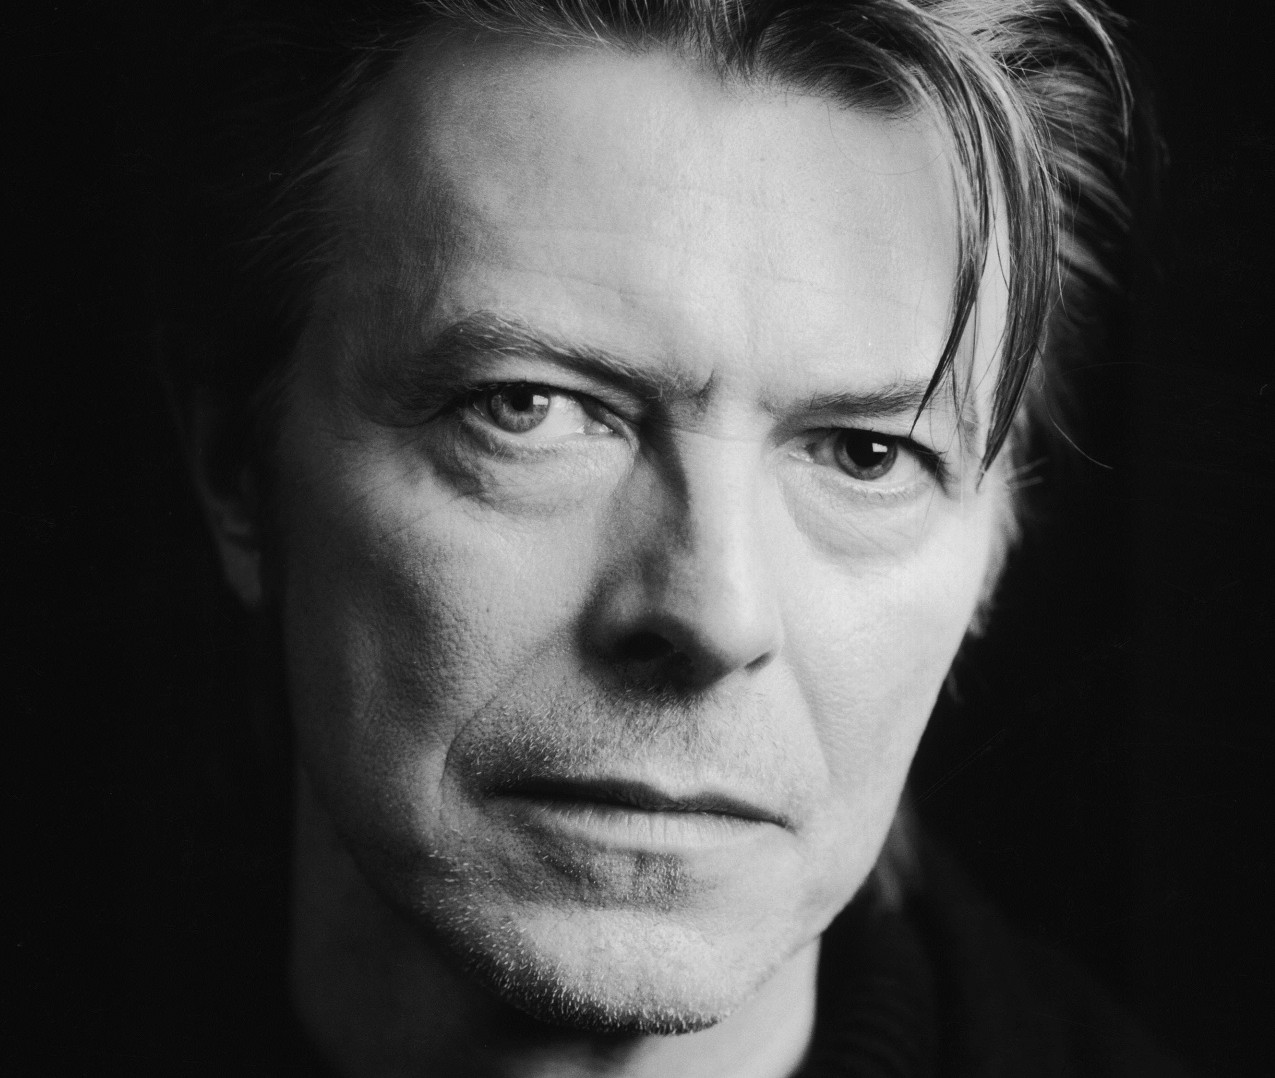 David Bowie “sold” this world…